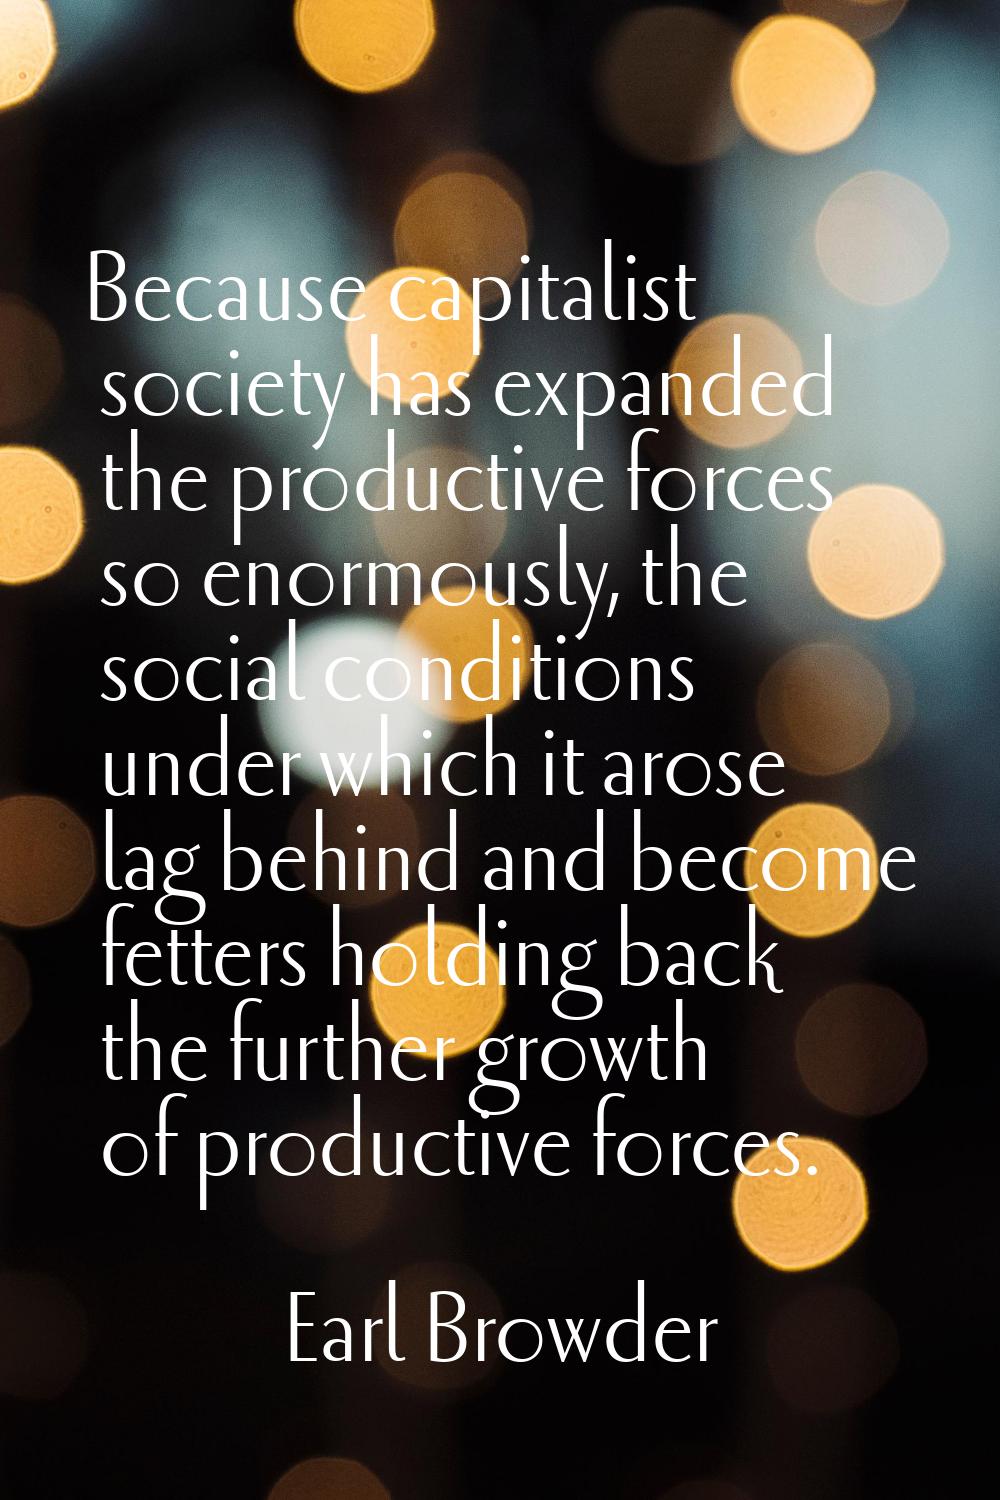 Because capitalist society has expanded the productive forces so enormously, the social conditions 